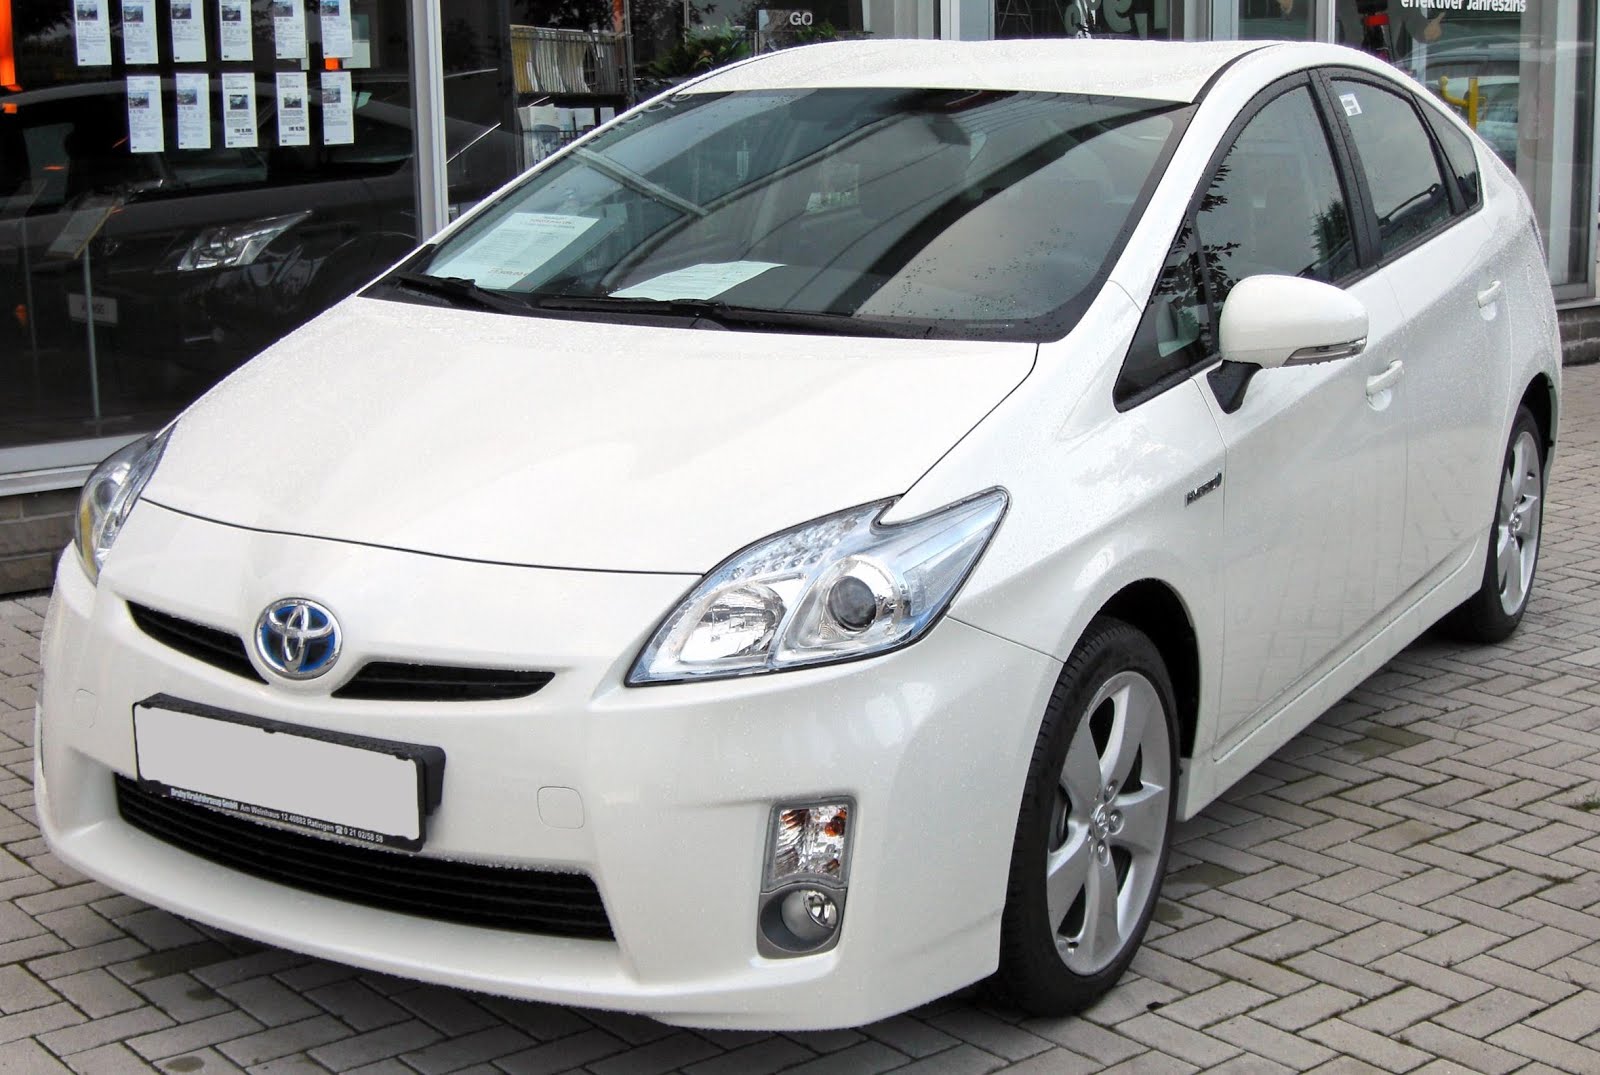 nicb-car-thieves-get-no-charge-from-toyota-prius-electric-vehicle-news